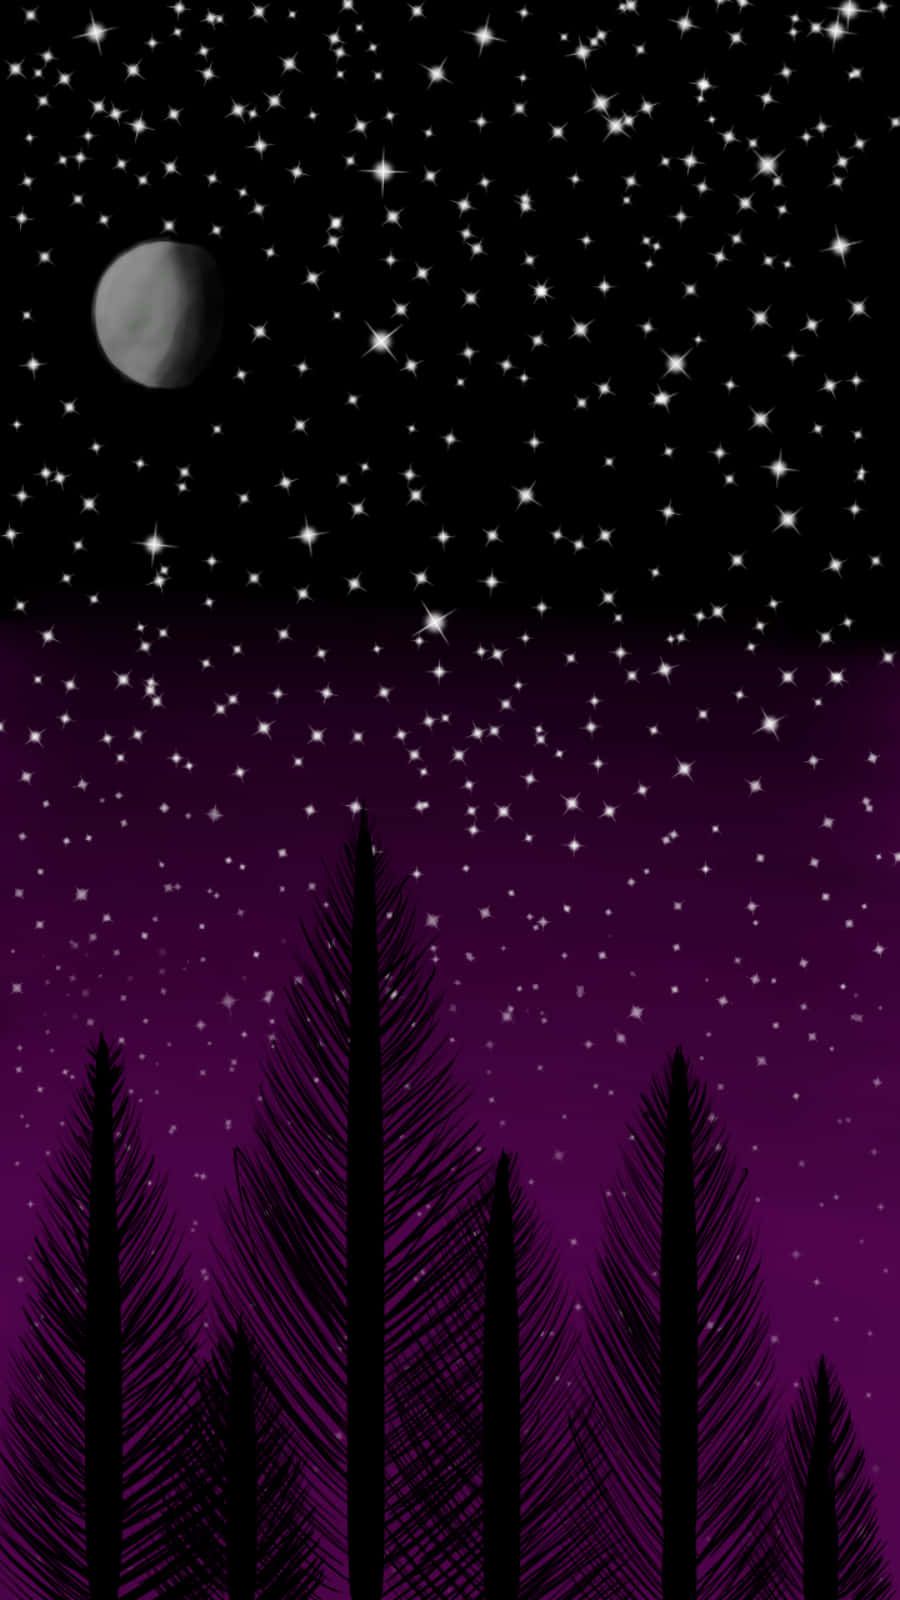 A night sky with stars and the moon above a group of trees. - Asexual